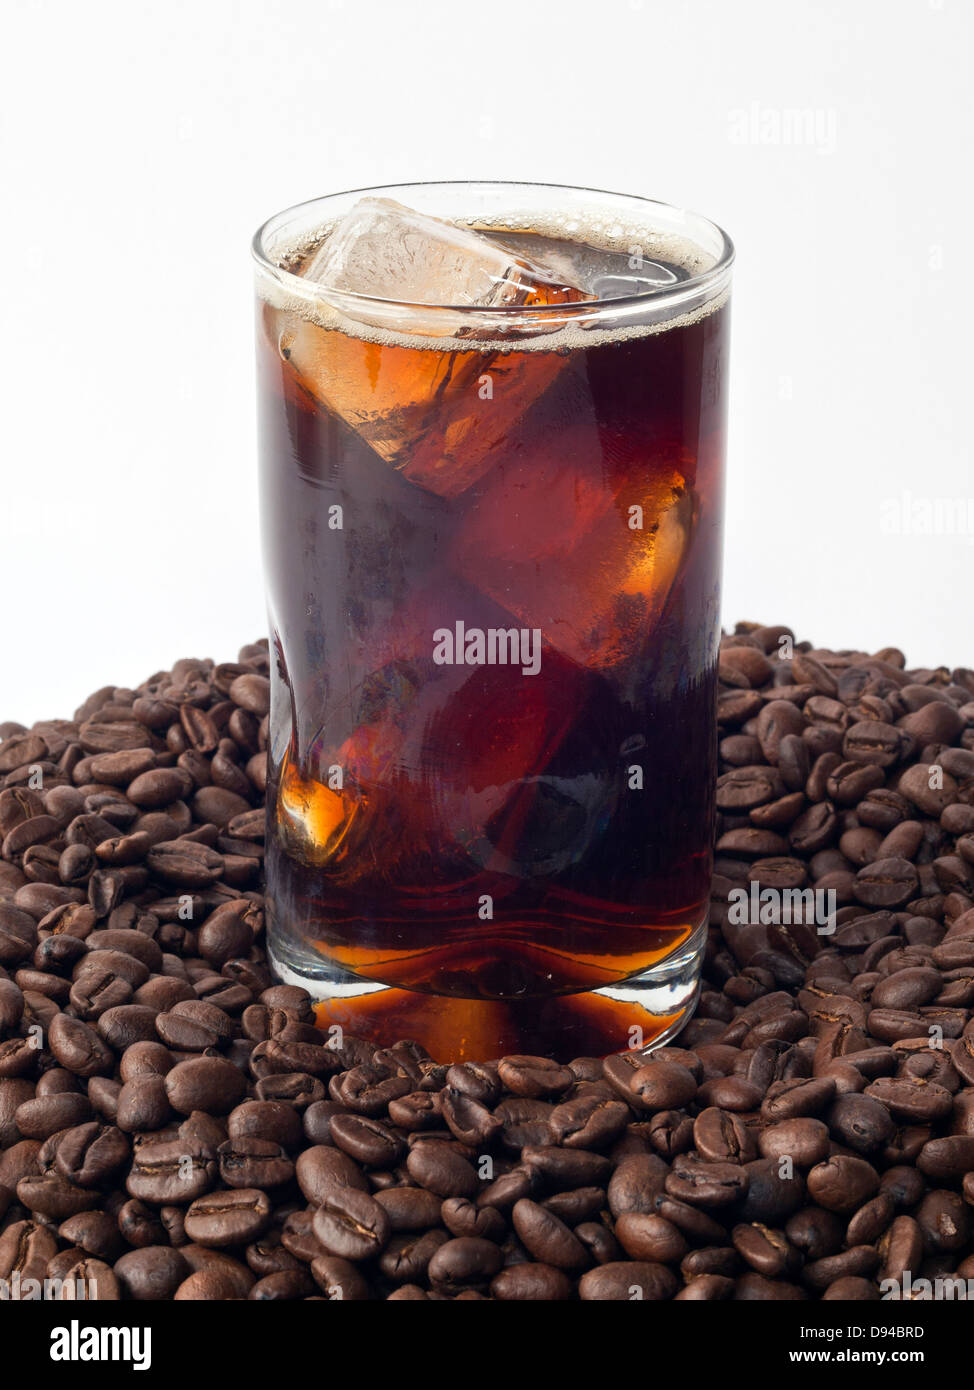 Iced coffee in glass on top of beans Stock Photo